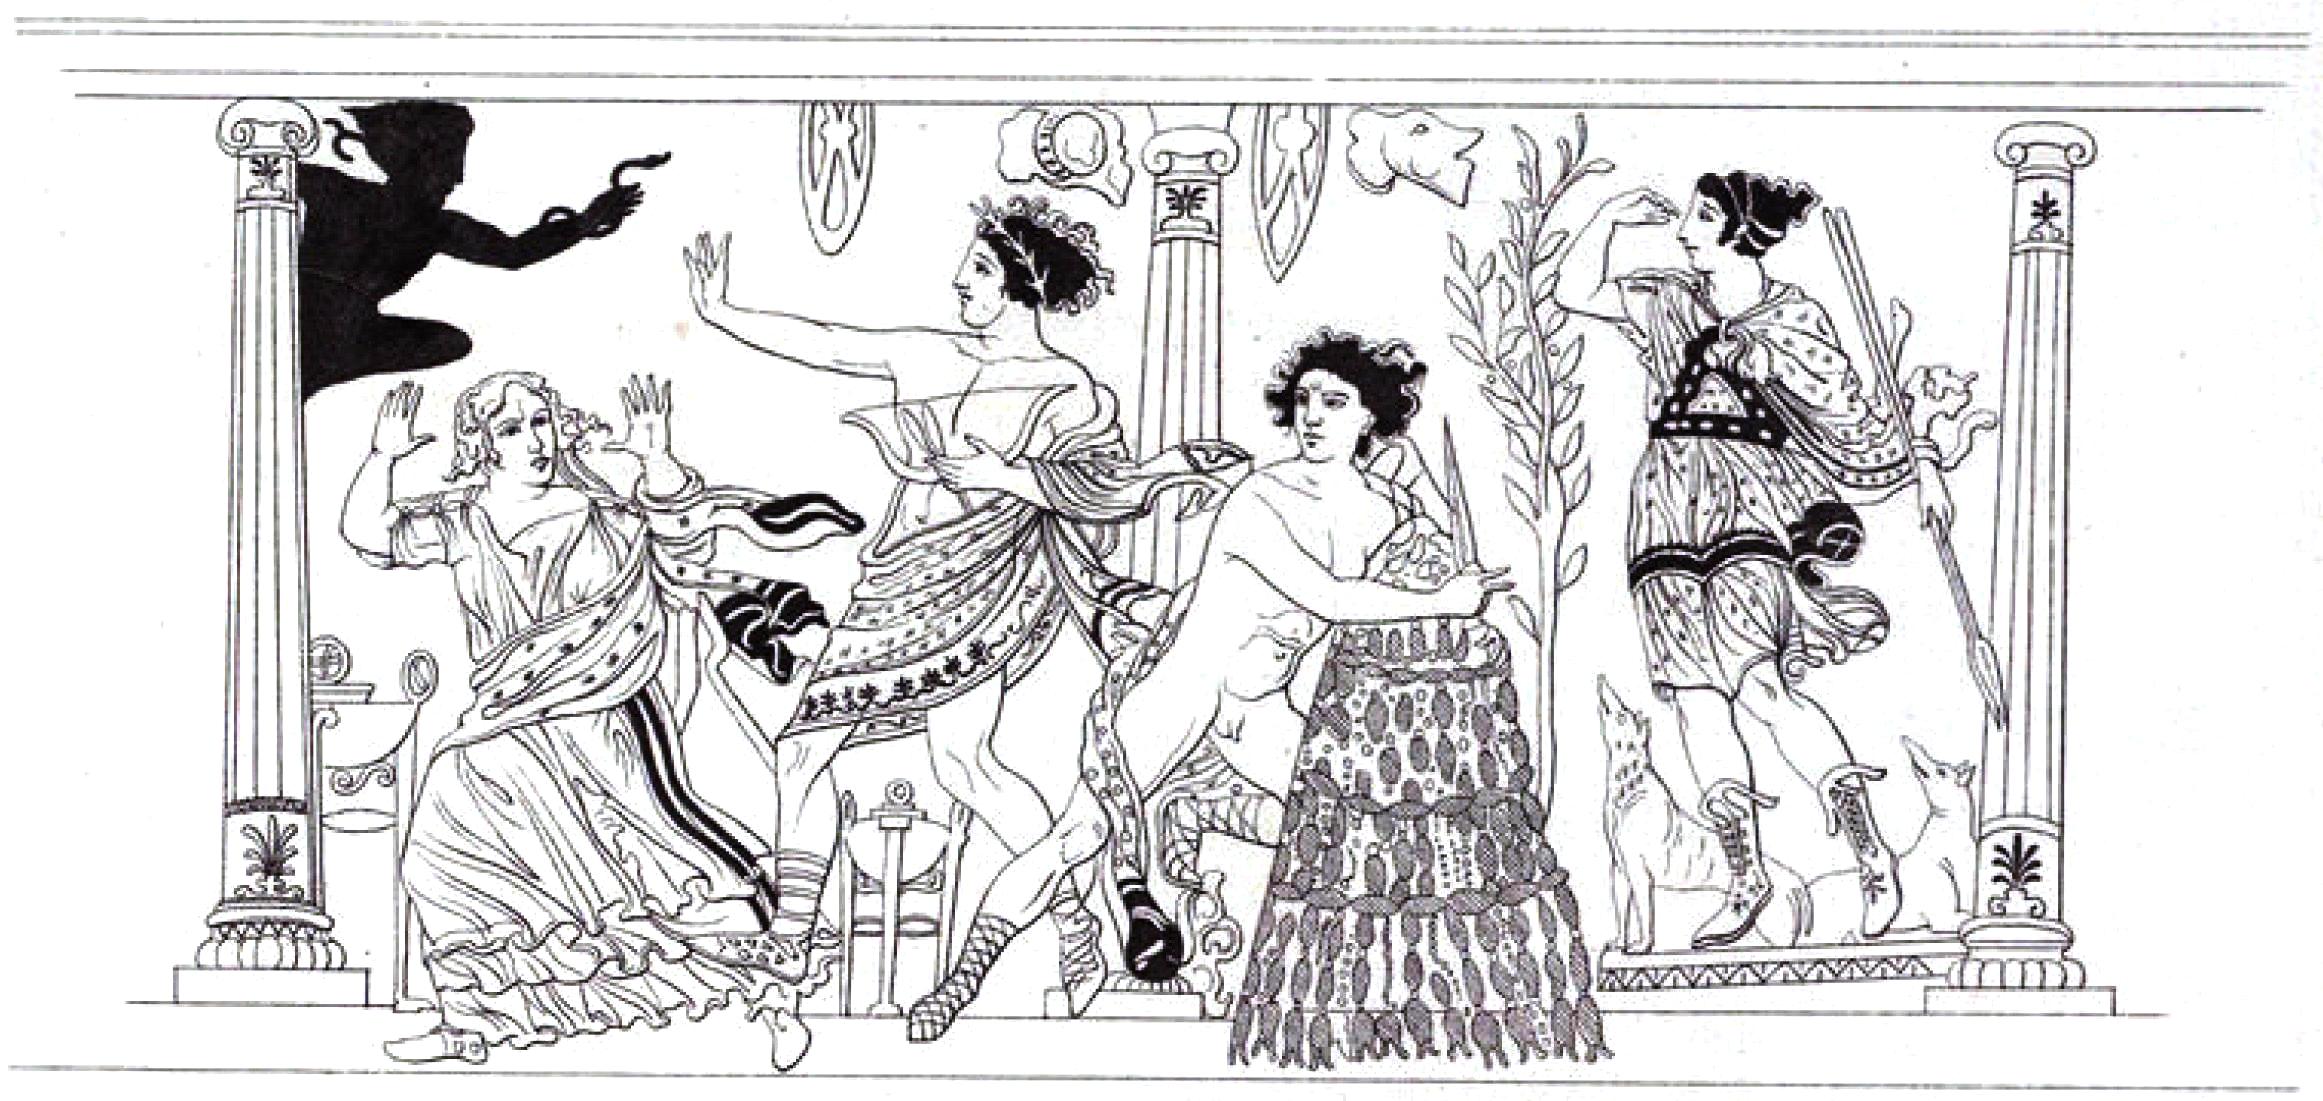 Orestes, nude and holding a knife, hangs on to the omphalos. Artemis, accompanied by two hounds, stands to his right. Apollo, to the left, chases away a Fury. The oracle, a robed woman, flees.